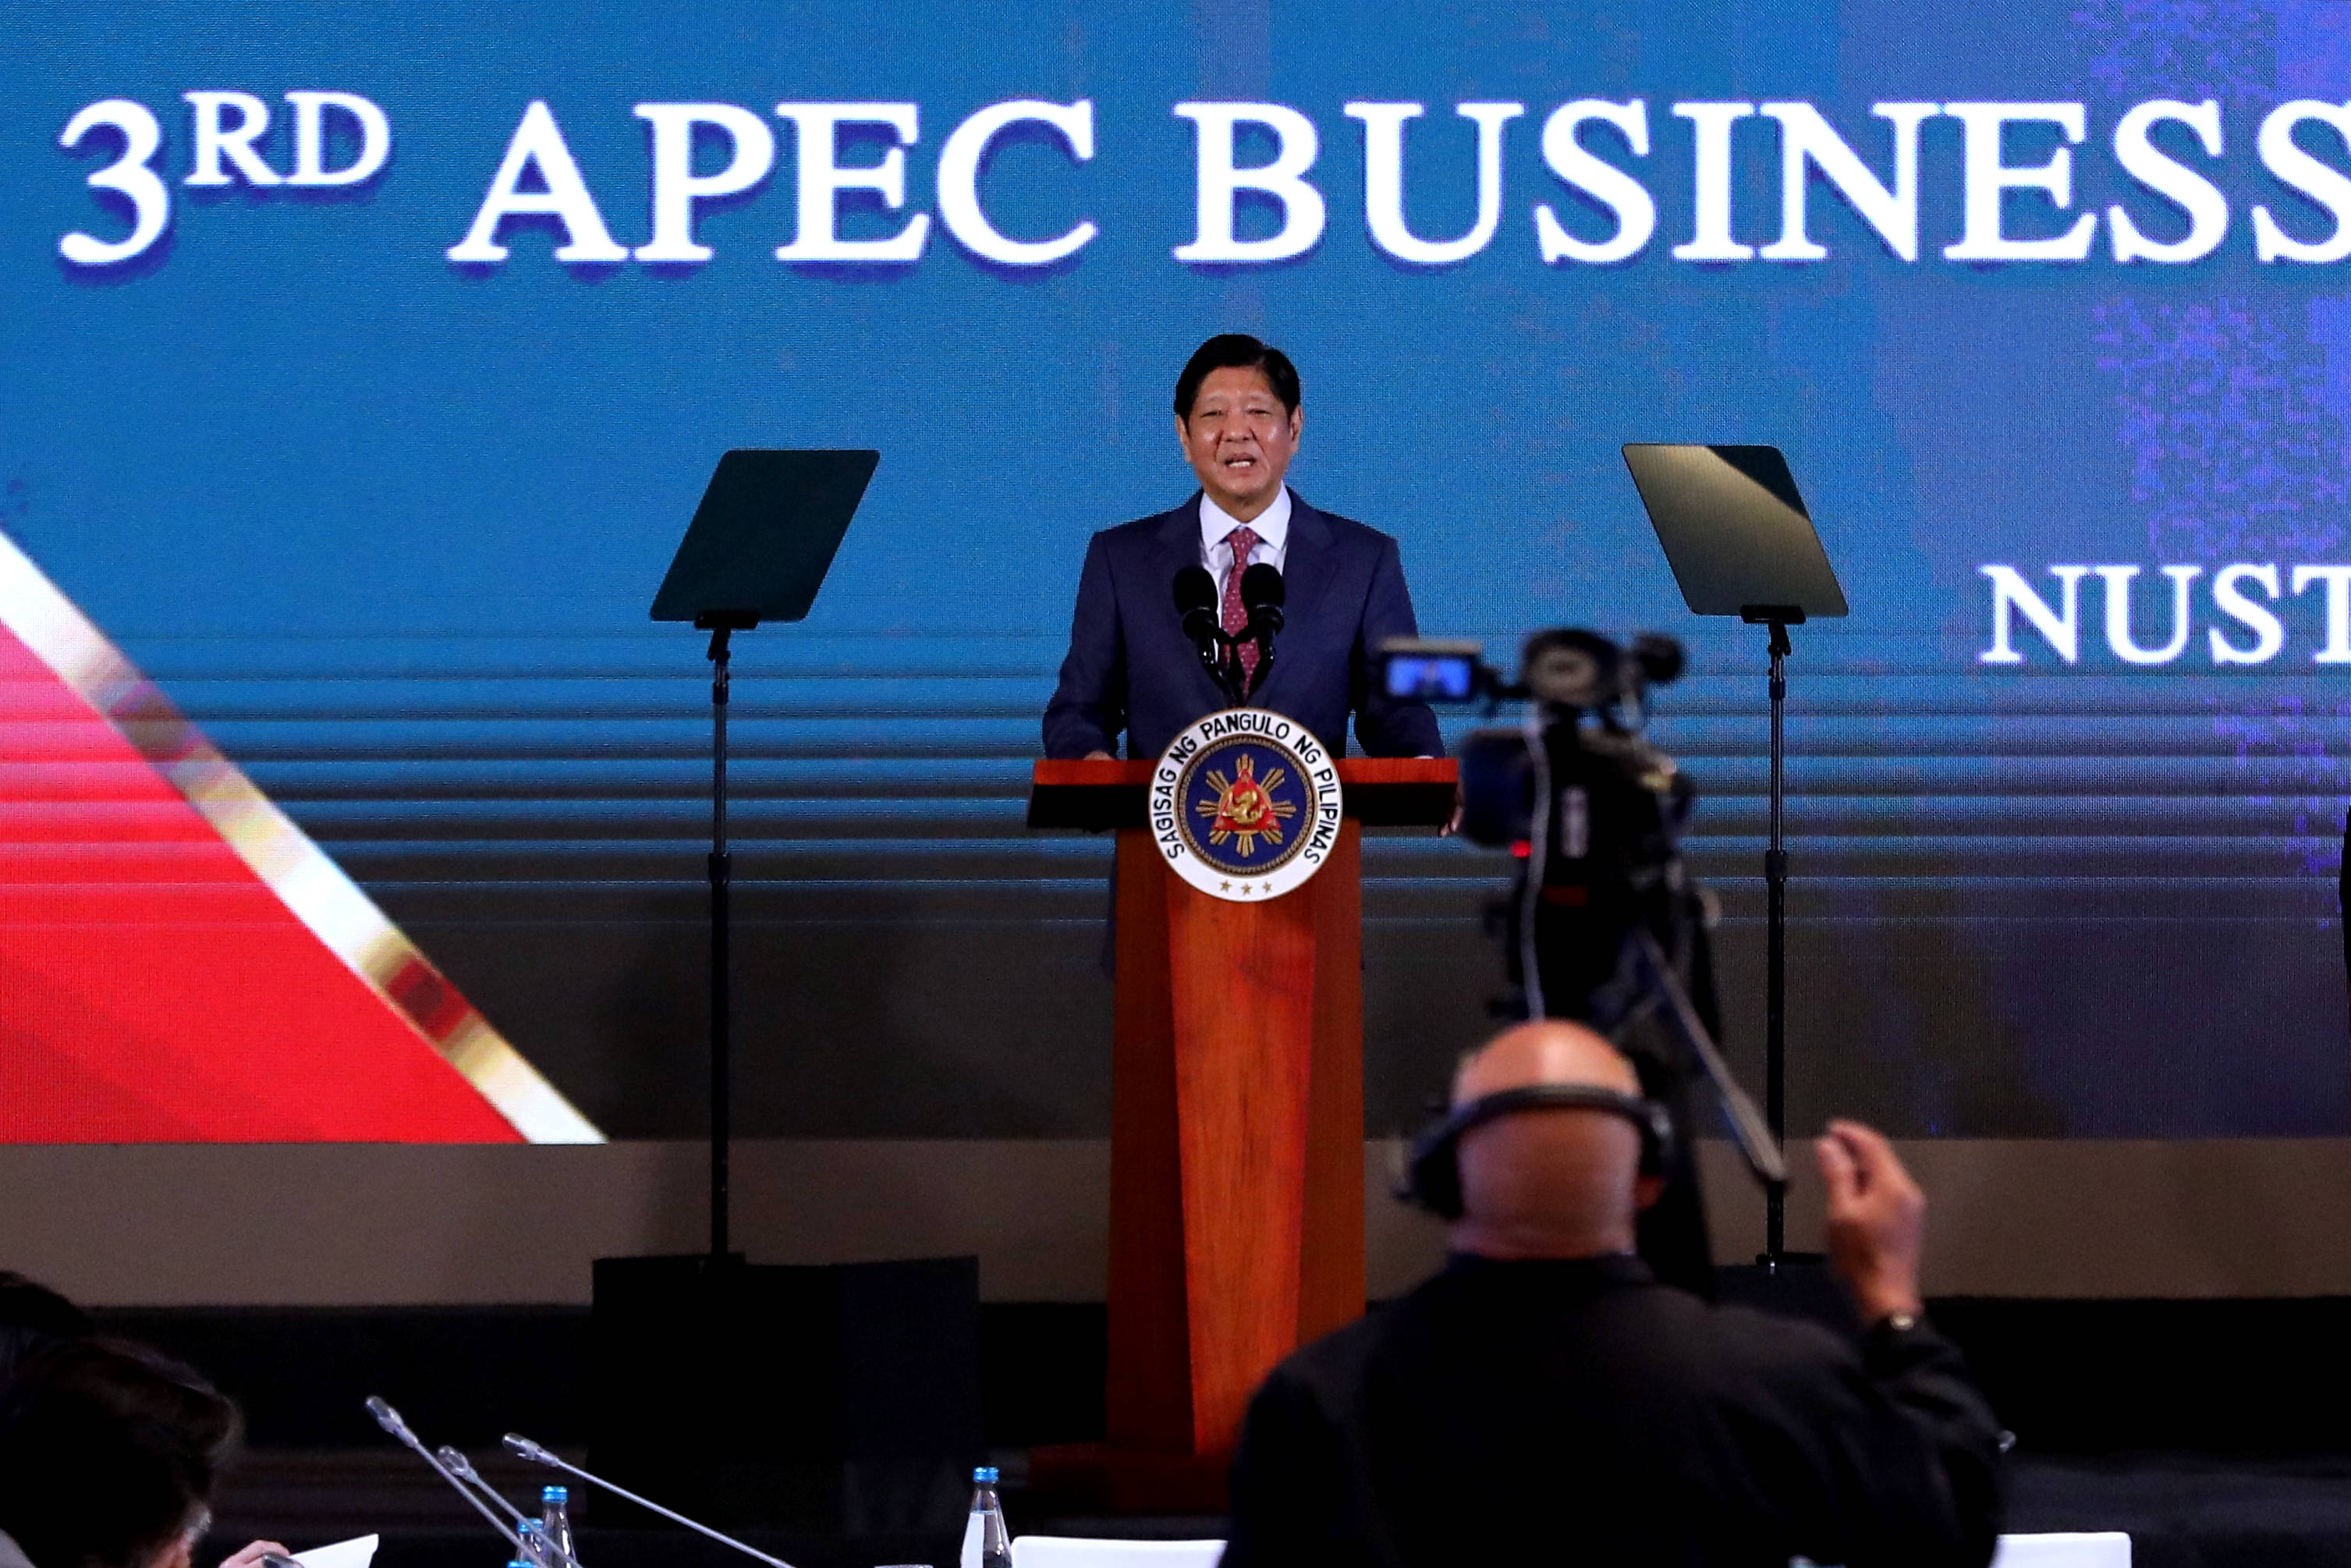 President Ferdinand R. Marcos Jr. keynotes opening ceremony of 3rd Asia-Pacific Economic Cooperation Business Advisory Council Meeting